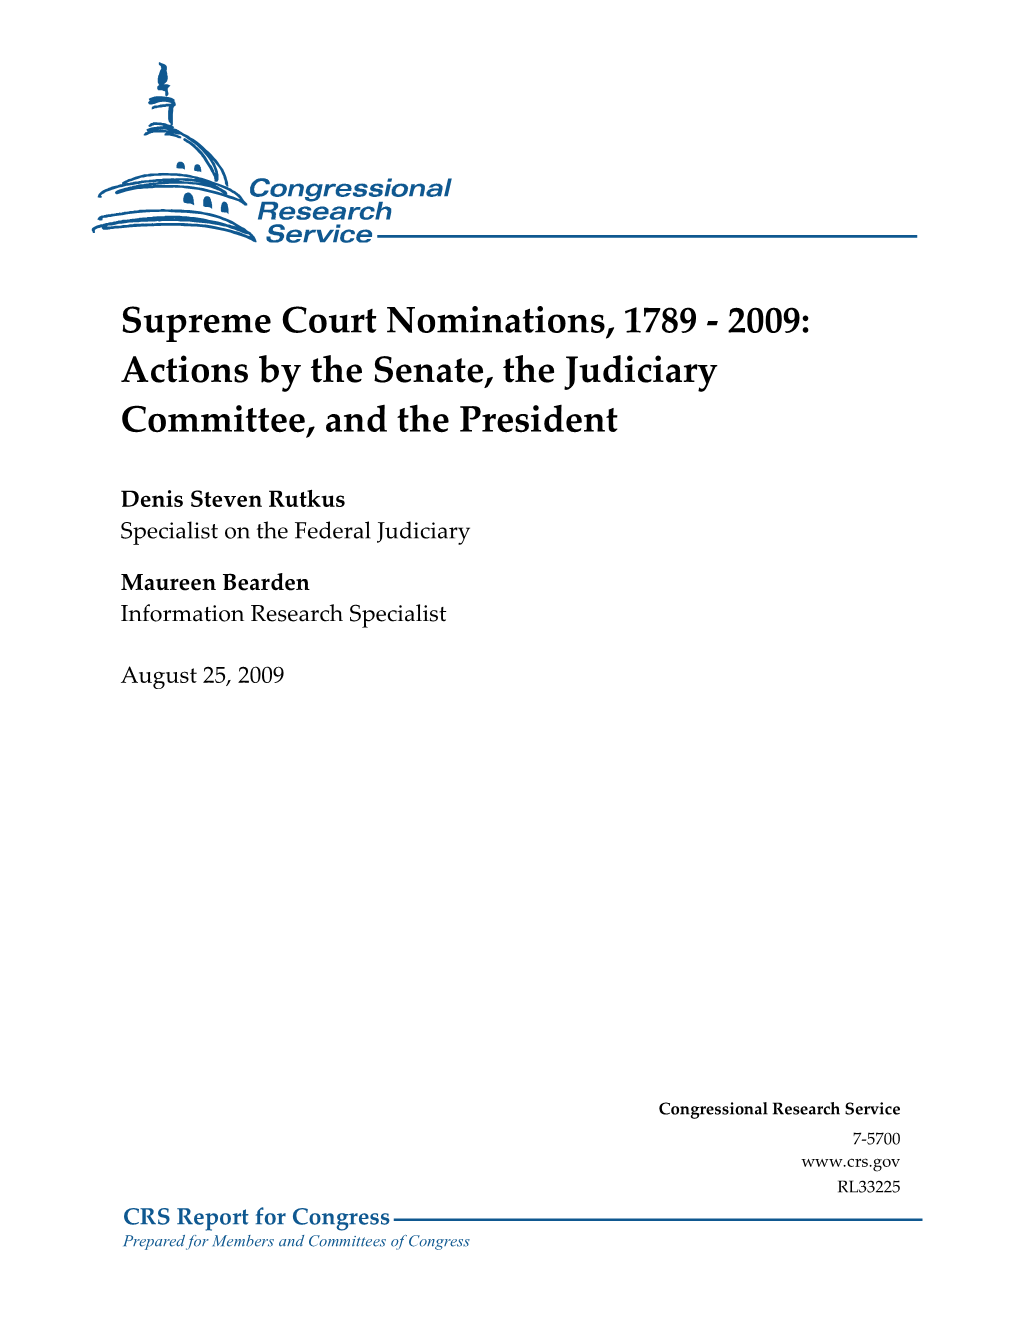 Supreme Court Nominations, 1789 - 2009: Actions by the Senate, the Judiciary Committee, and the President